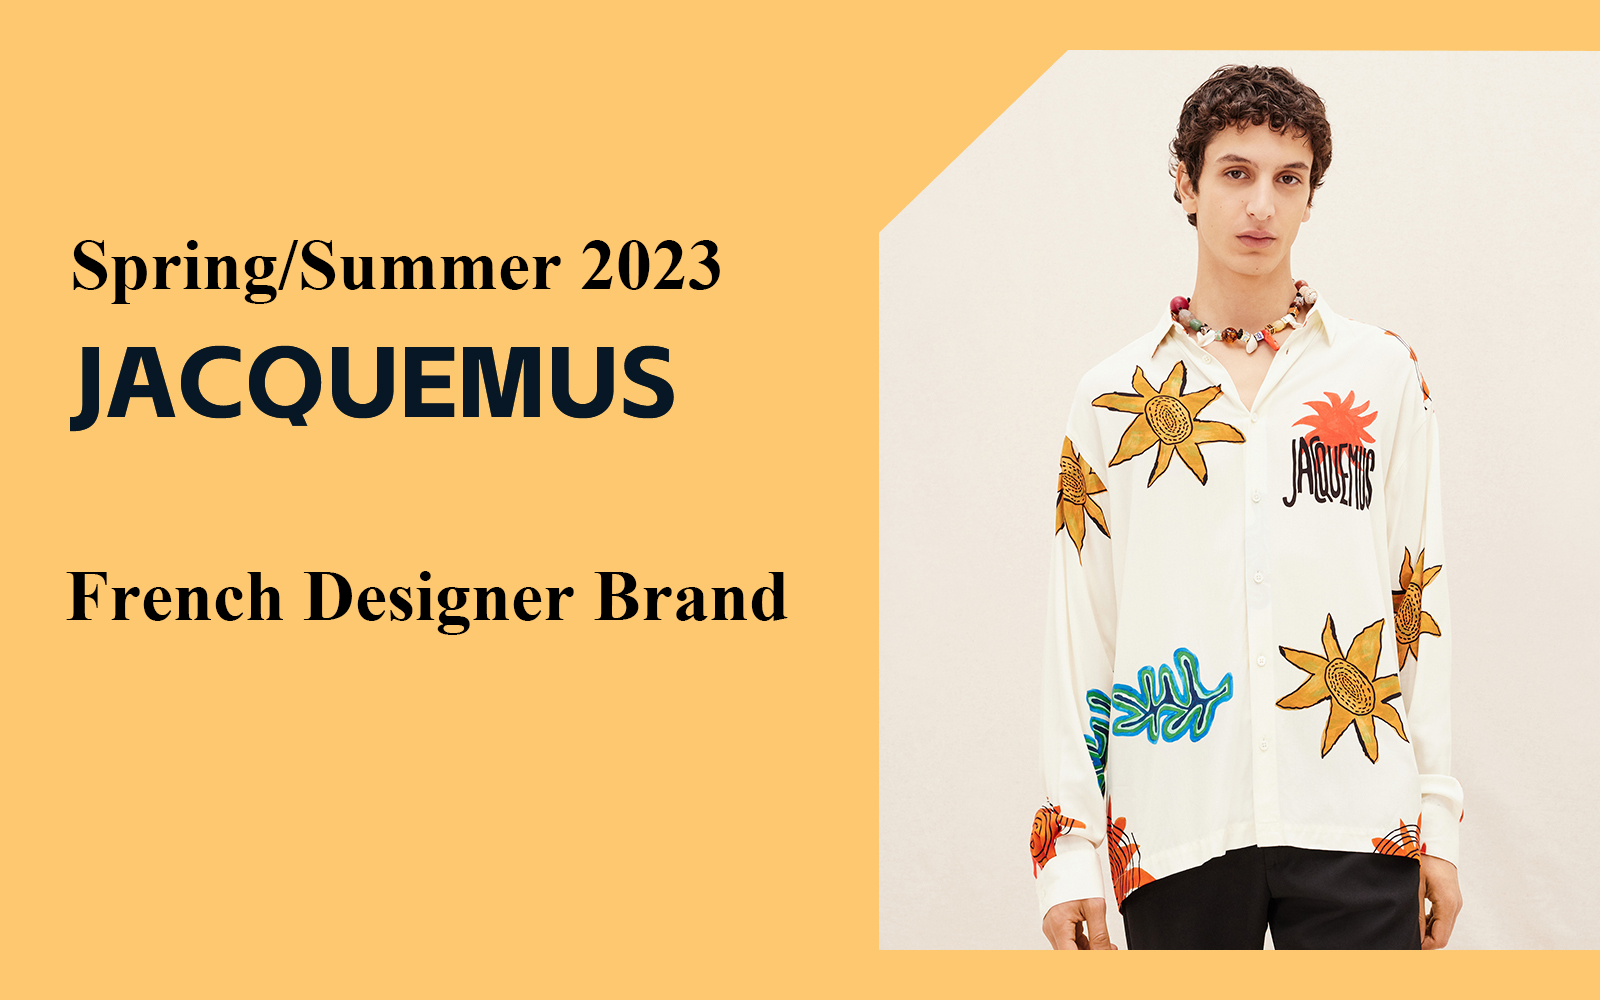 French Romance -- The Analysis of Jacquemus The Menswear Designer Brand